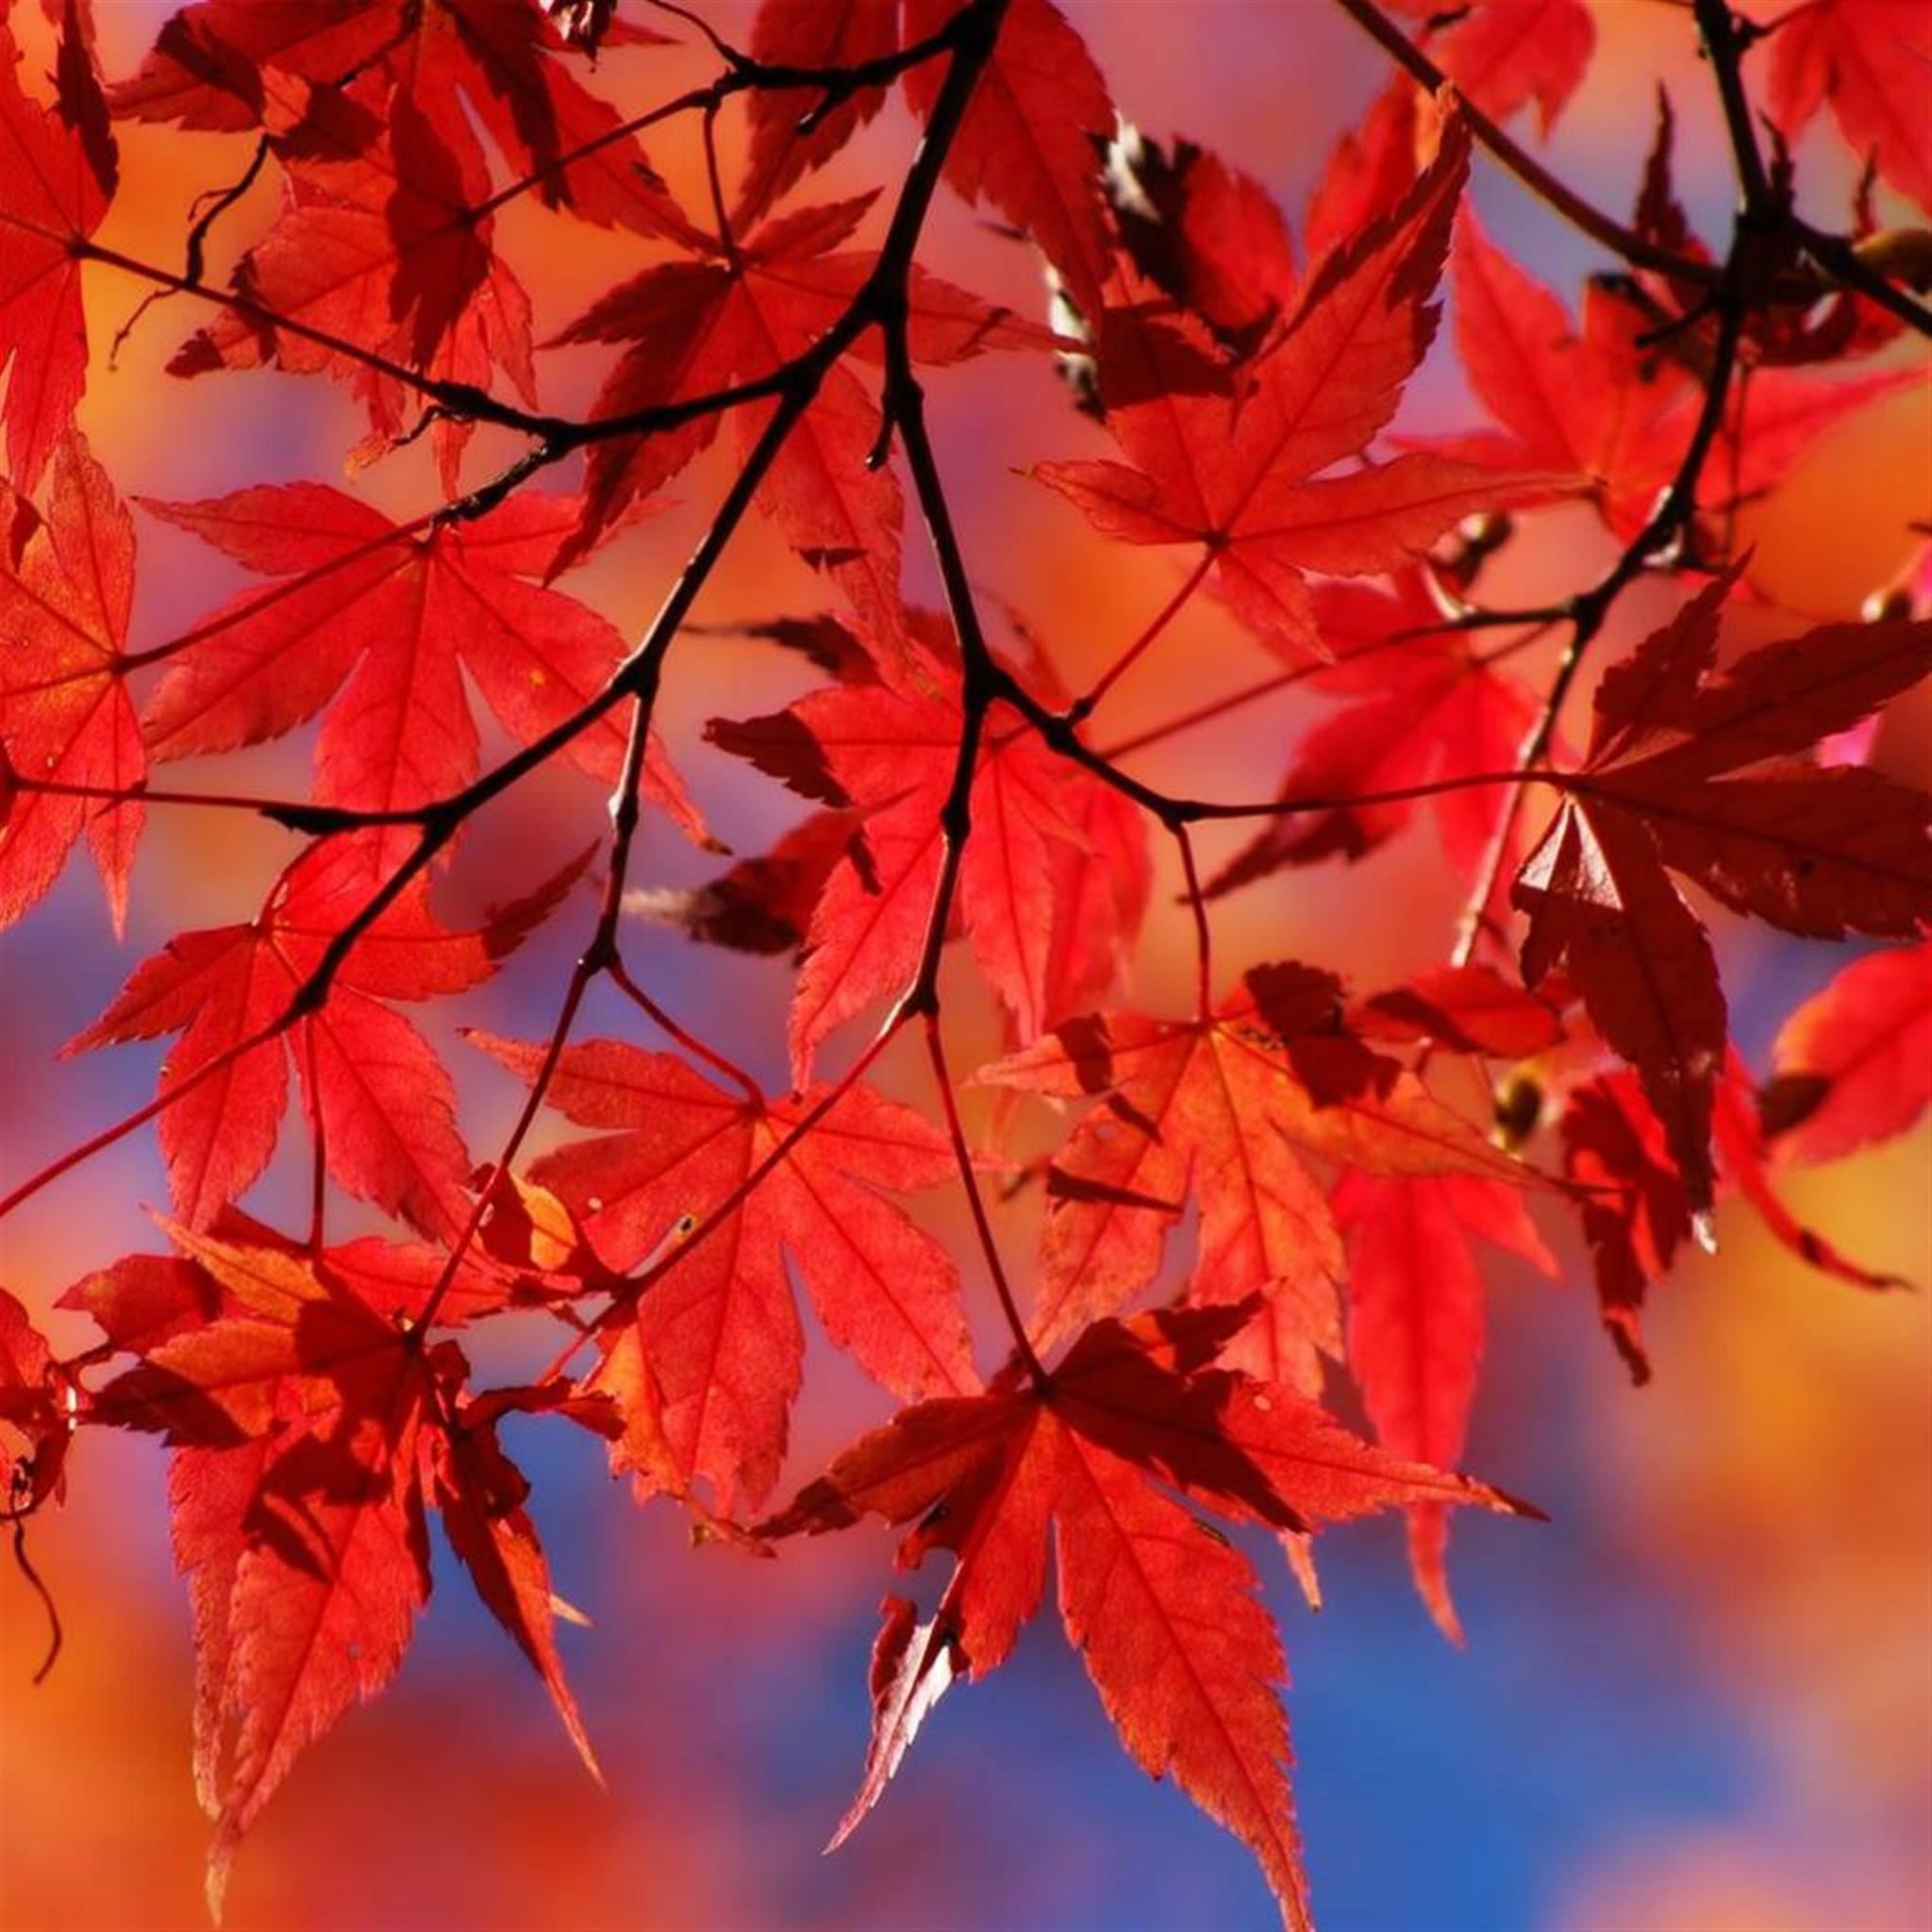 Beautiful Autumn Red Maple Leaf Branch iPad Air Wallpaper Free Download